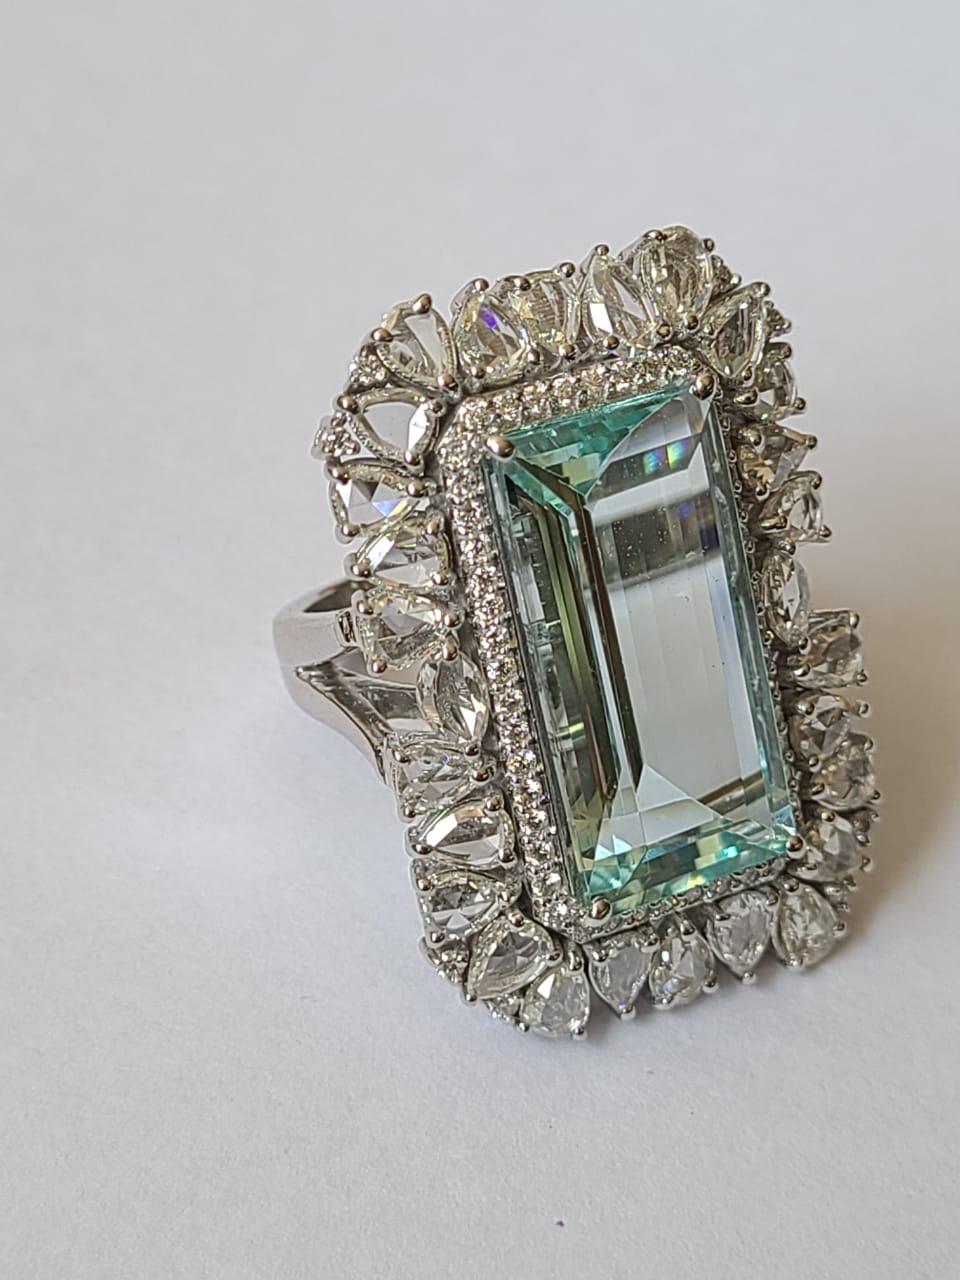 A very gorgeous Aquamarine Cocktail Ring set in 18K Gold & Diamonds. The Aquamarine, weighing 10.11 carats, is completely natural, without any treatment. The combined weight of the Diamonds is 3.03 carats. Net gold weight is 13.32 grams. The